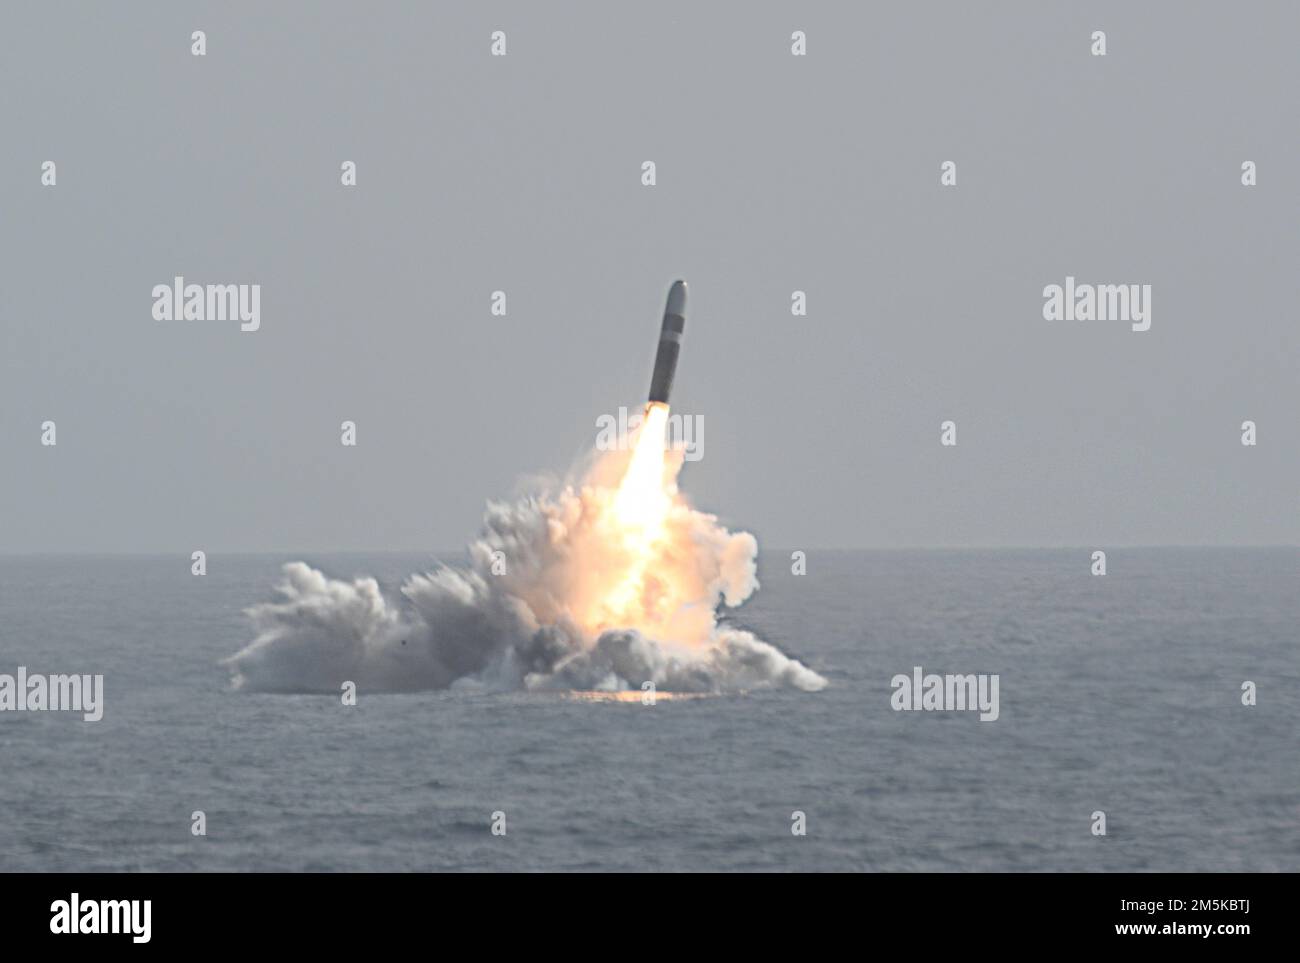 ATLANTIC OCEAN (Feb. 9, 2021) – An unarmed Trident II D5 Life Extension (D5LE) missile launches from Ohio-class ballistic missile submarine USS West Virginia (SSBN 736) during a Commander Evaluation Test (CET) off the coast of Florida. The primary objective of a CET is to validate performance expectations of the Trident II D5LE strategic weapon system (SWS) on boats that are strategically deployed, and this particular test concluded the D5LE CET population flights for the Ohio-class SSBN. Future tests will be Follow-on Commander Evaluation Tests (FCET) and are required as part of rigorous read Stock Photo